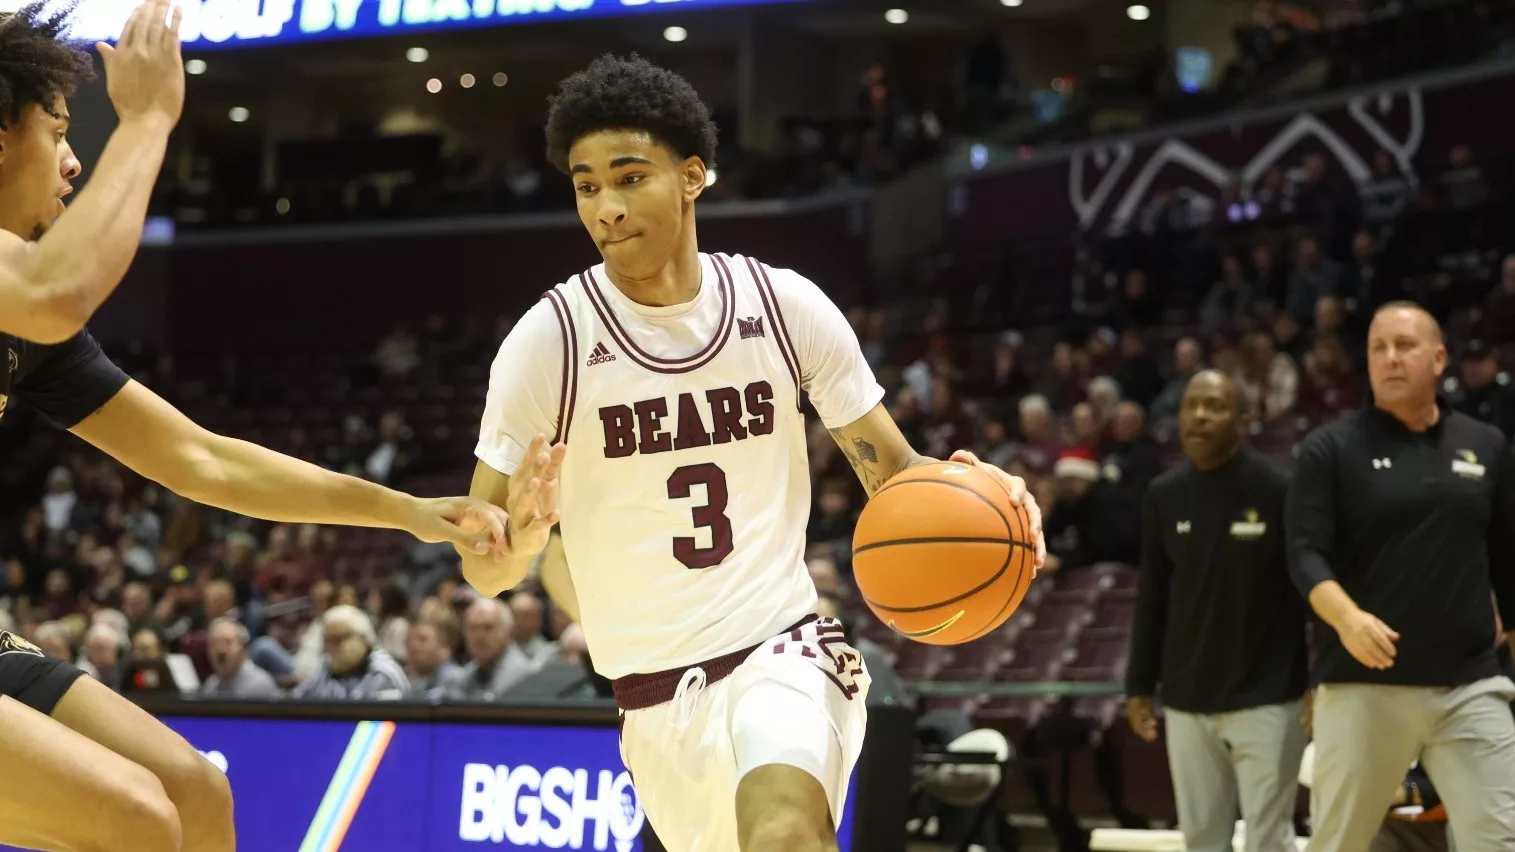 Tyler Bey the second Missouri State player this week to commit to SIU